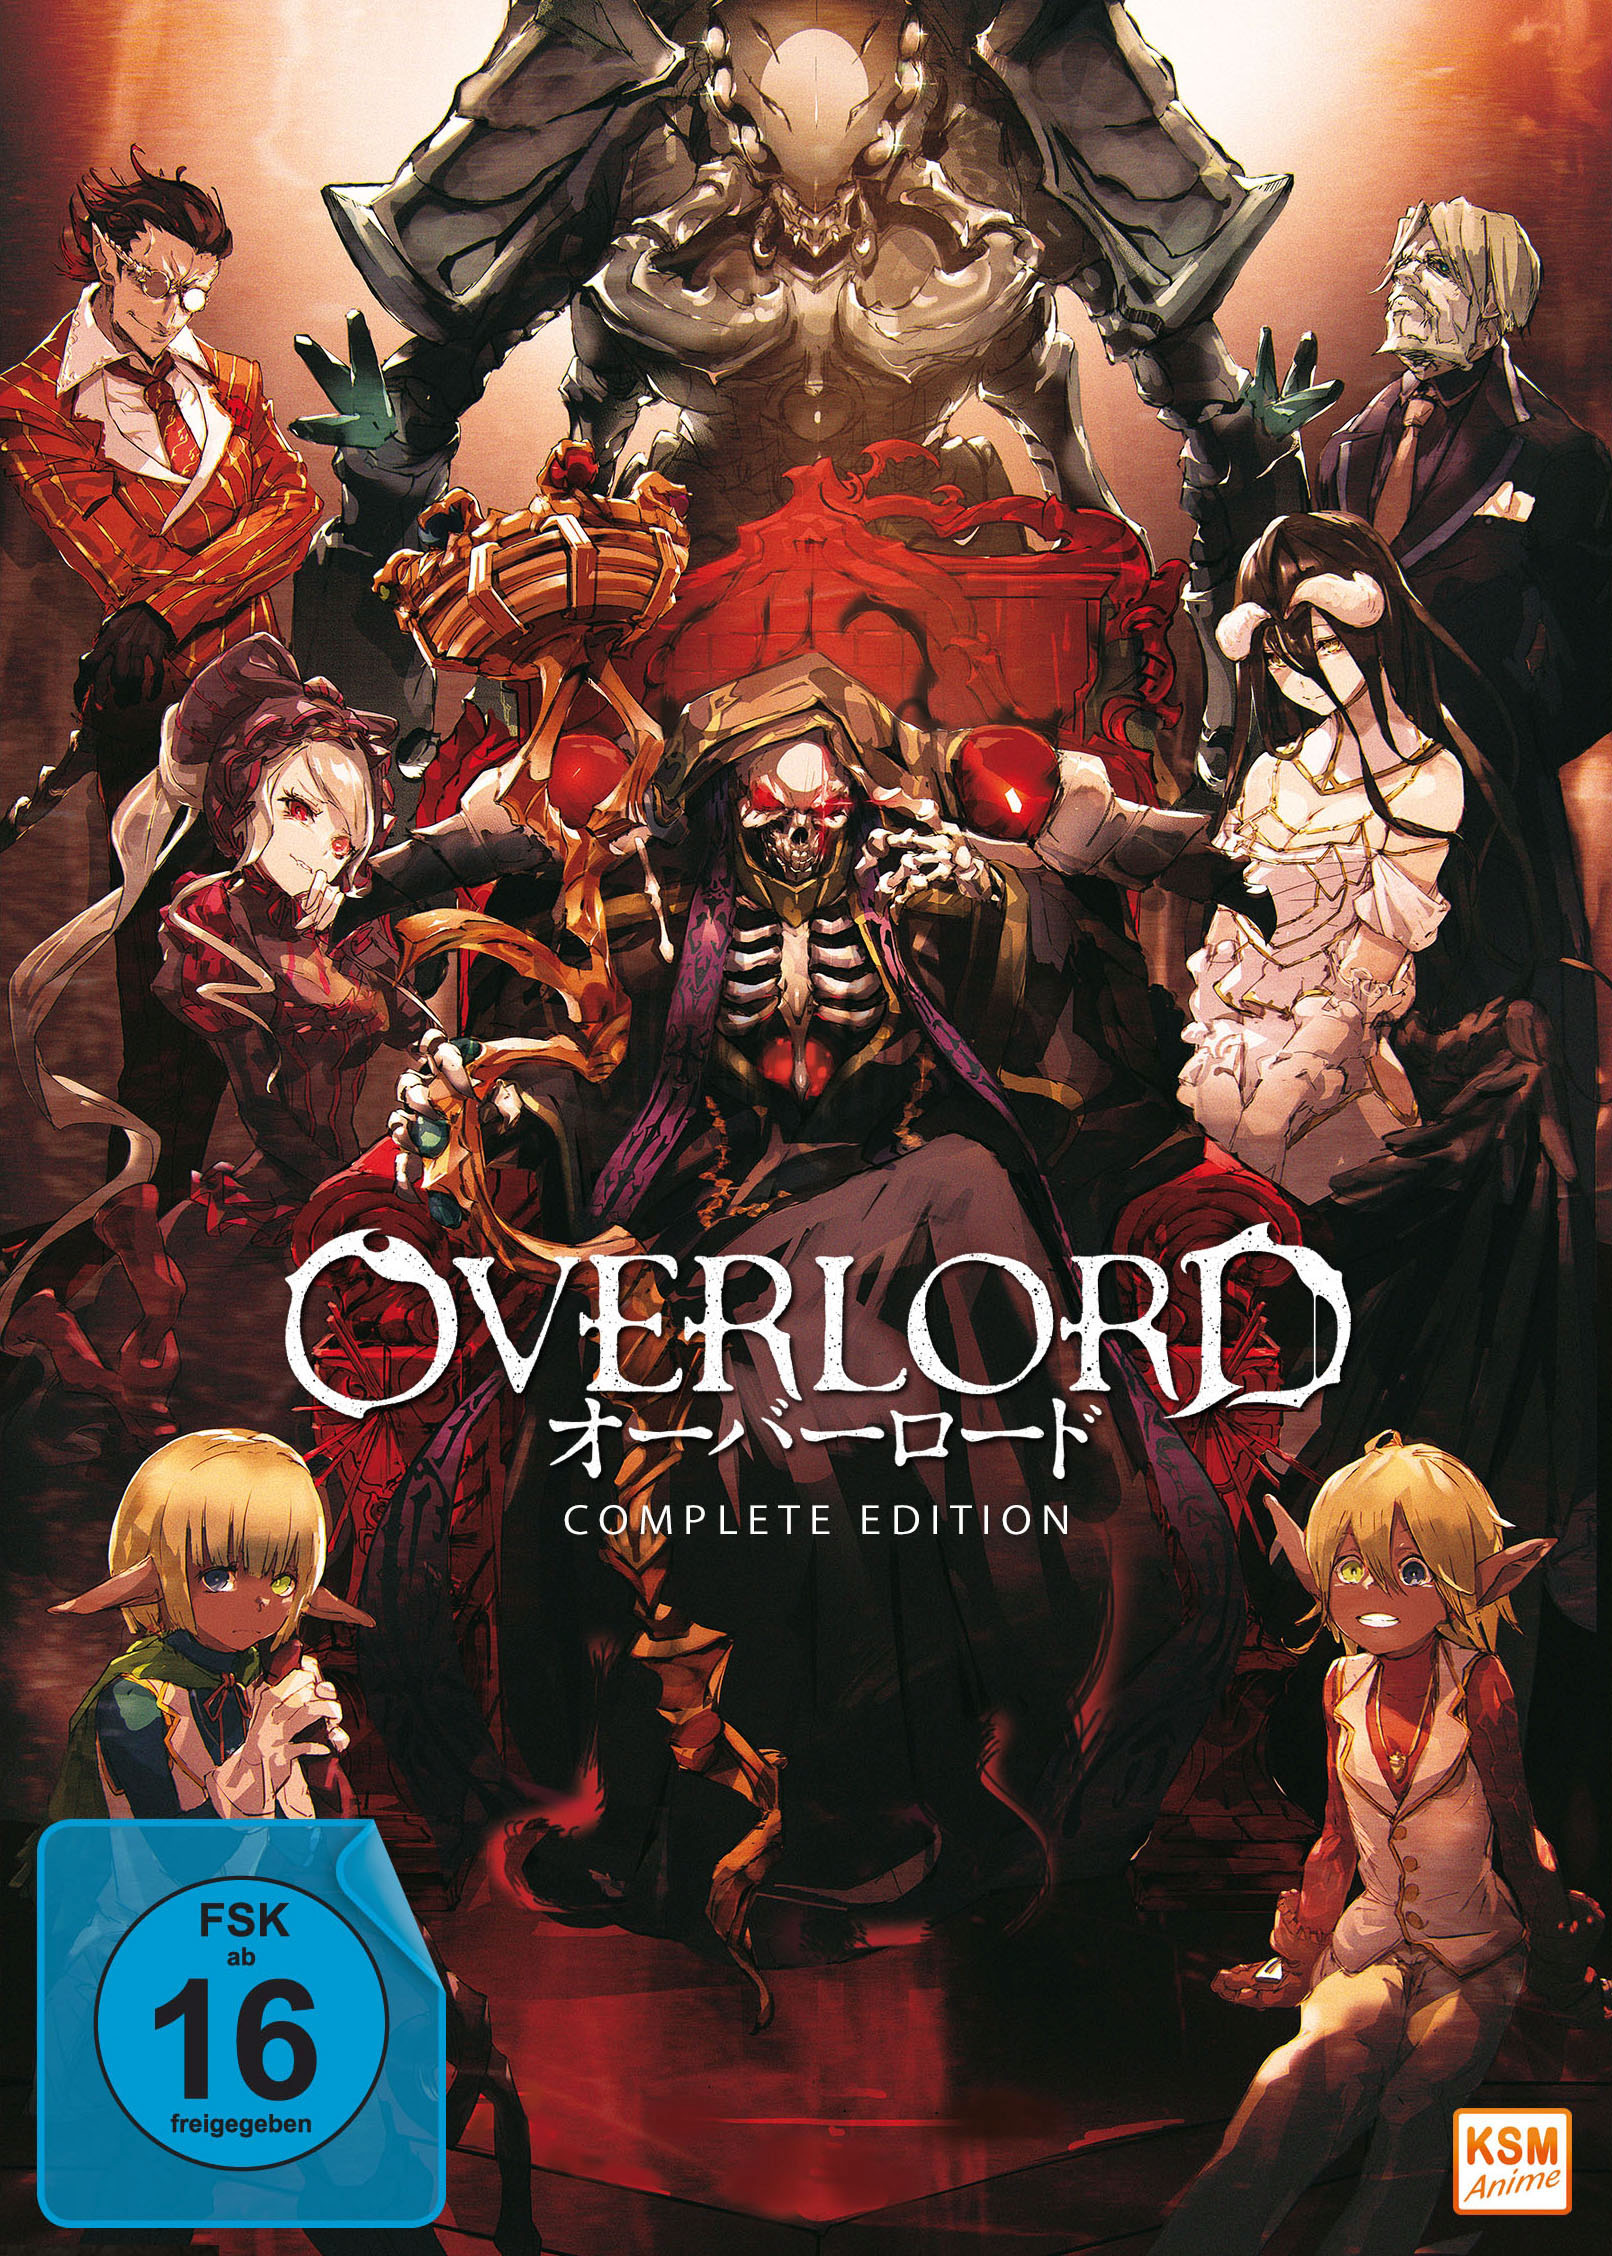 DVD Overlord Complete Episoden) - Edition (13